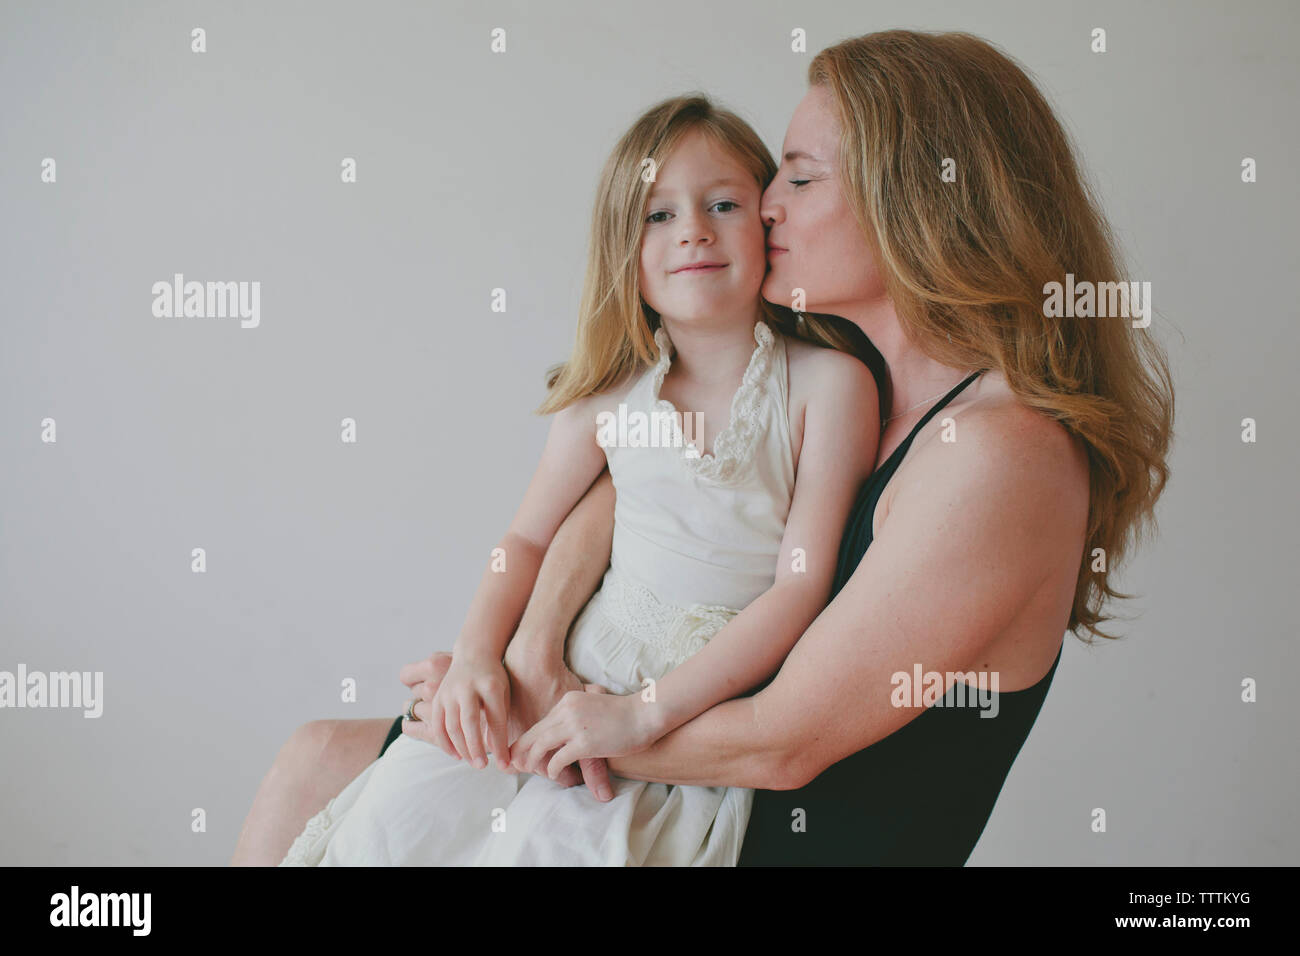 Portrait of daughter with mother kissing her against white background Stock Photo